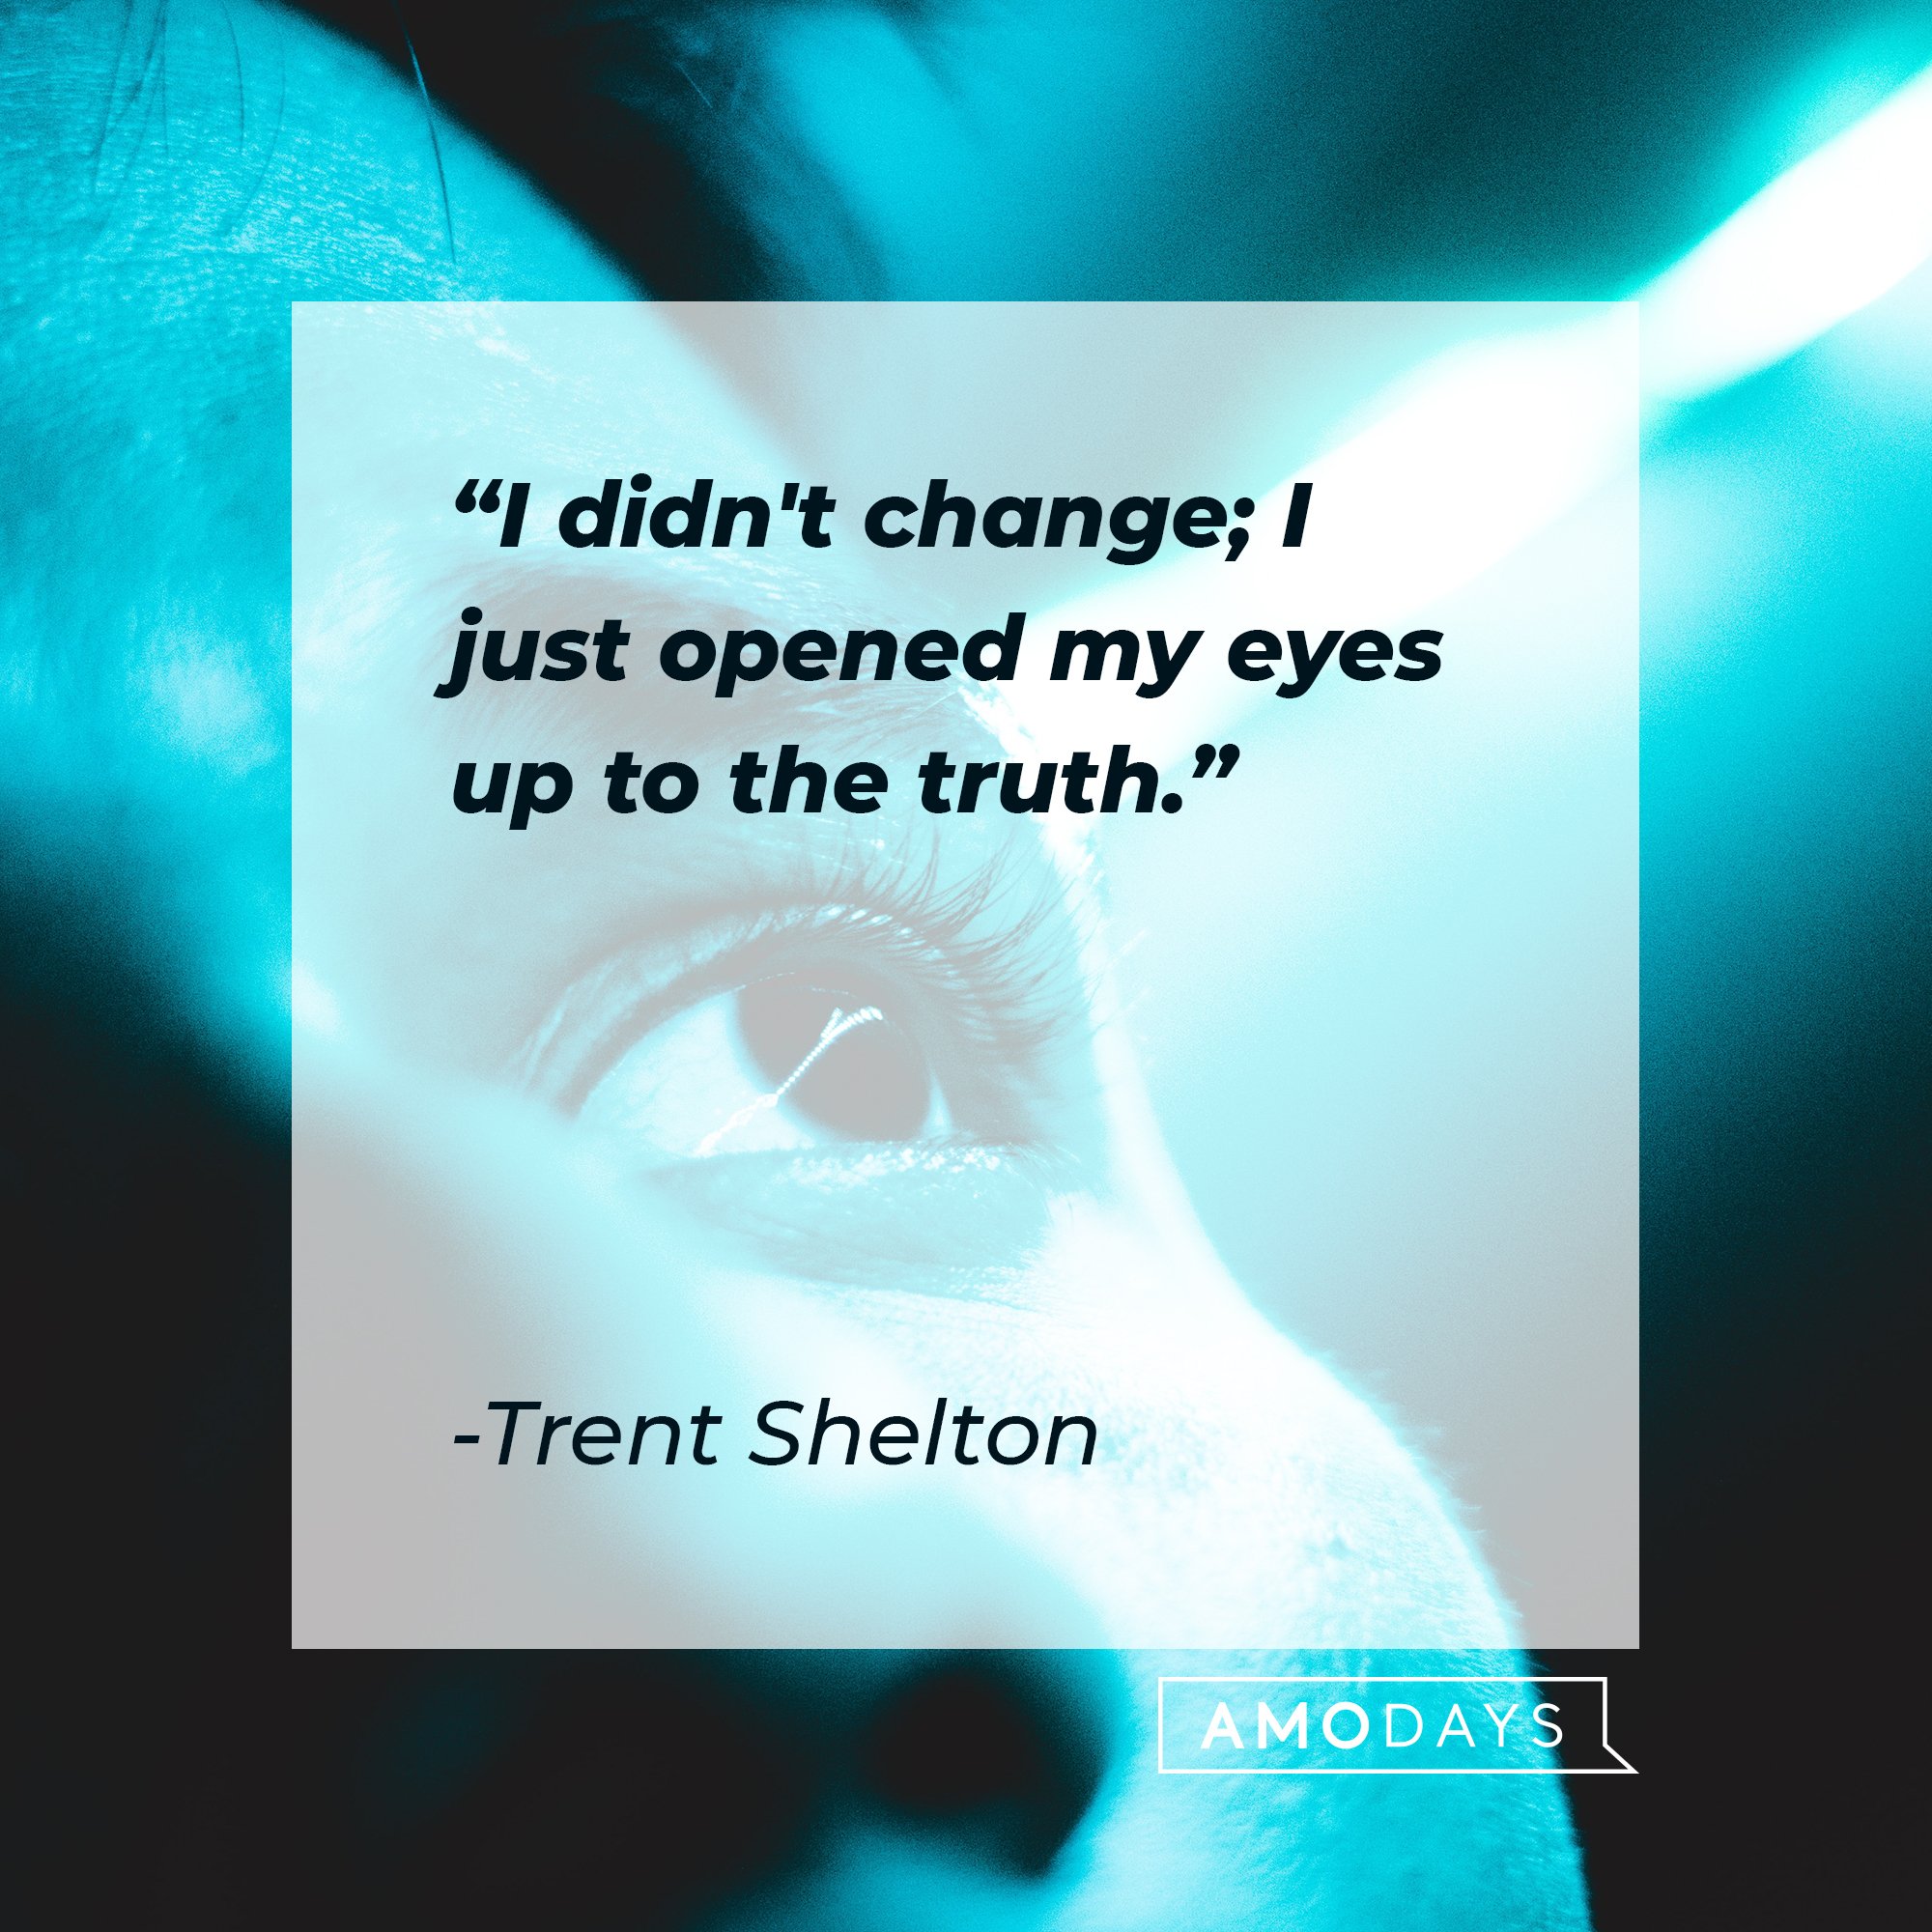 Trent Shelton's quote: "I didn't change; I just opened my eyes up to the truth." | Image: AmoDays